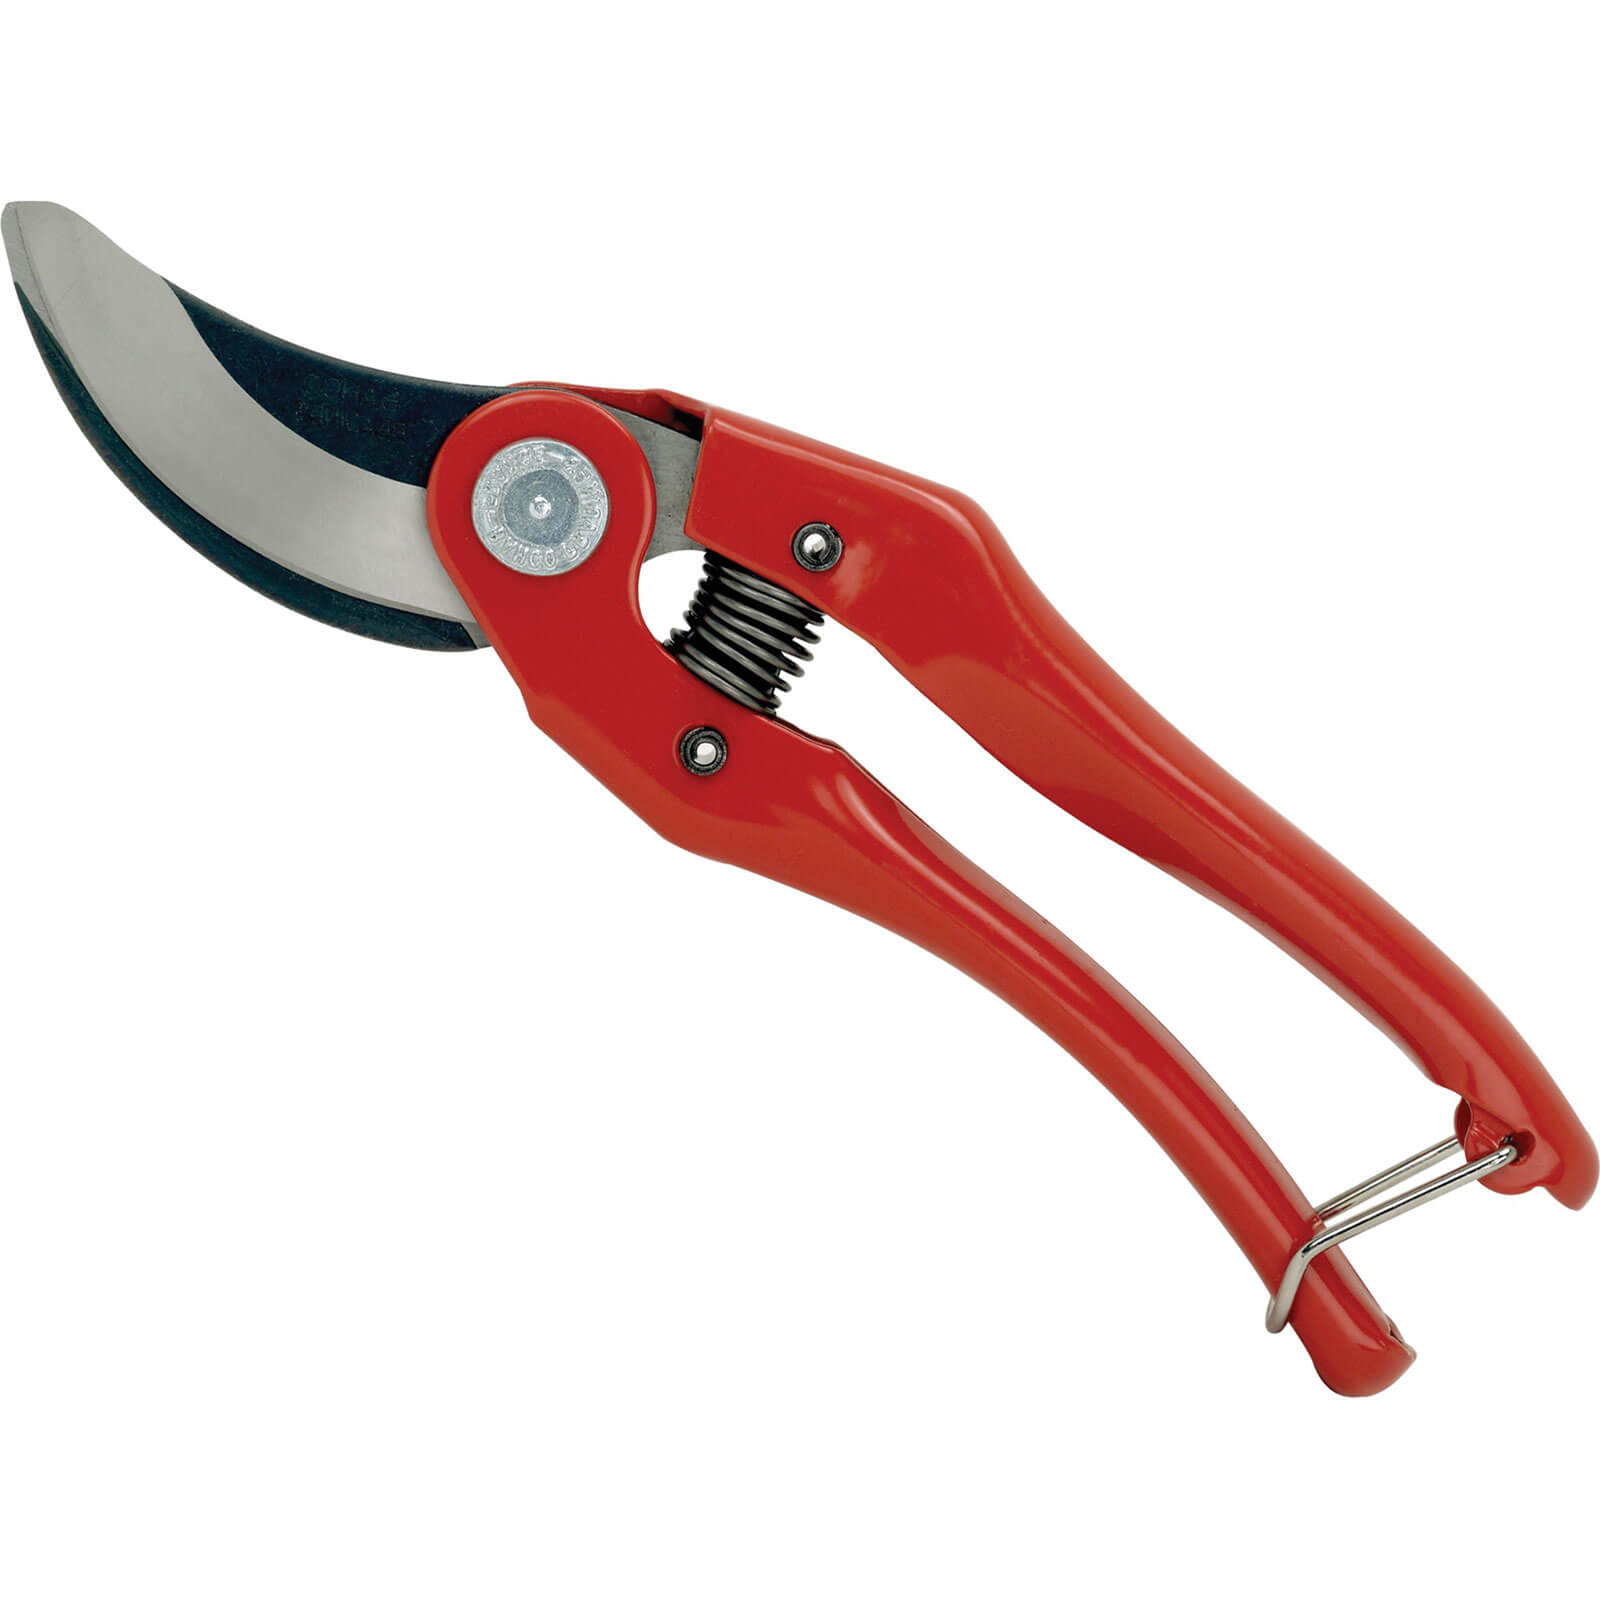 Bahco Bypass Secateurs 200mm Long 20mm Capacity